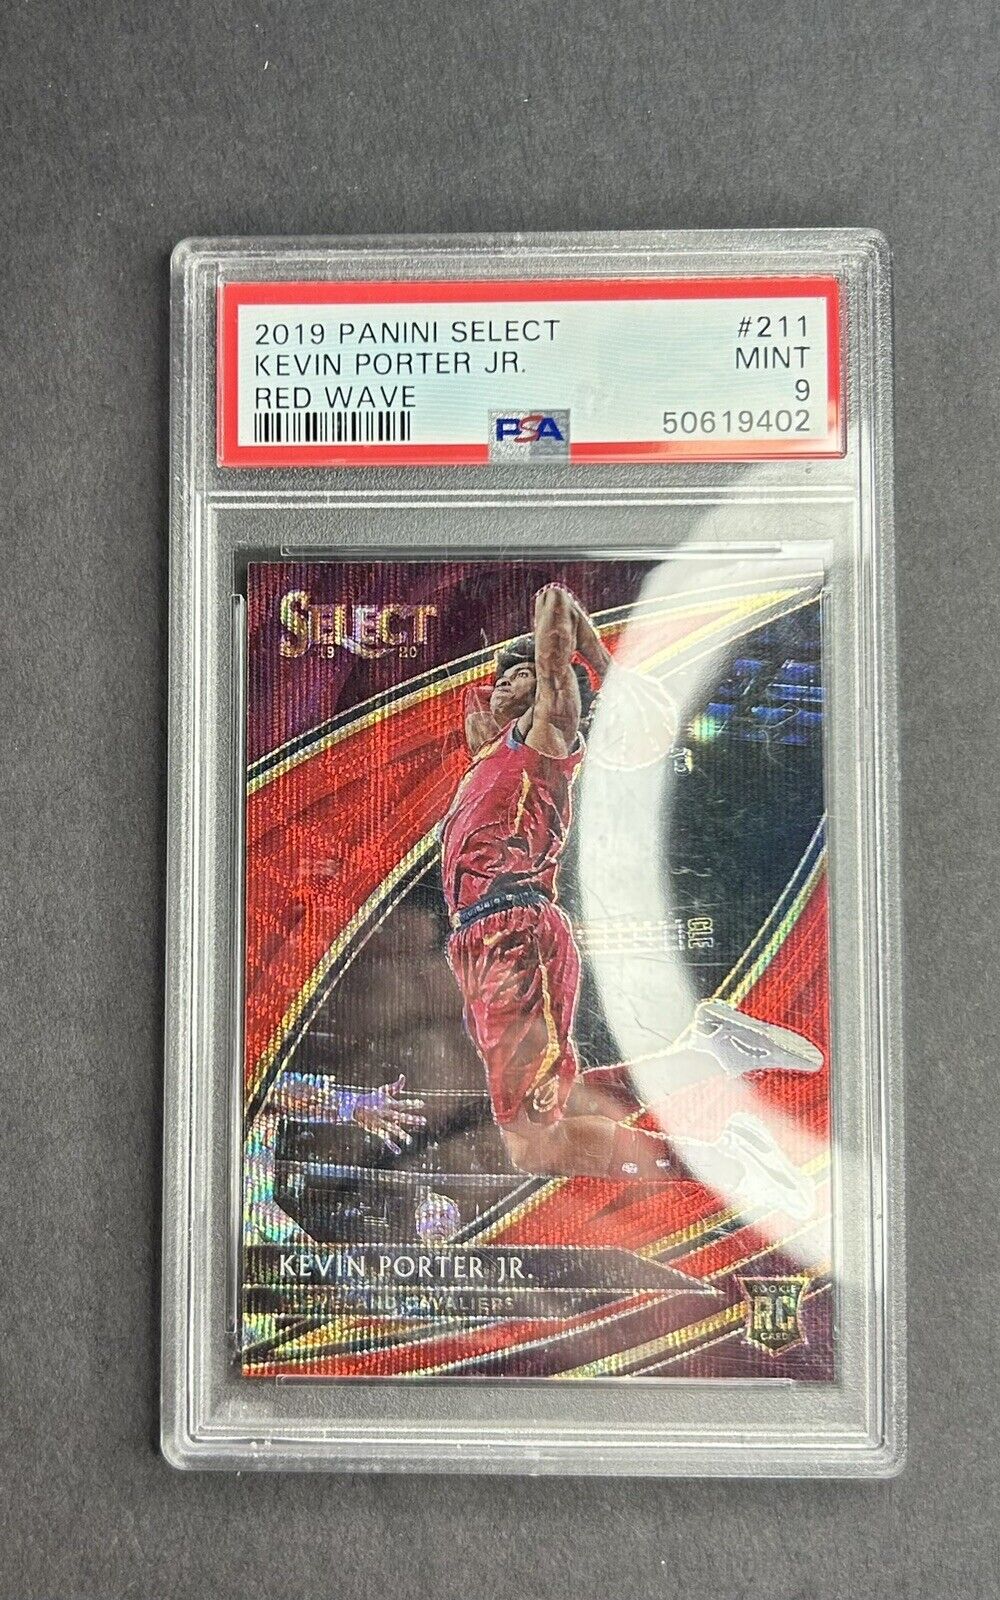 KEVIN PORTER JR. 2019-20 Panini Select Courtside Tmall Red Wave Rookie PSA 9